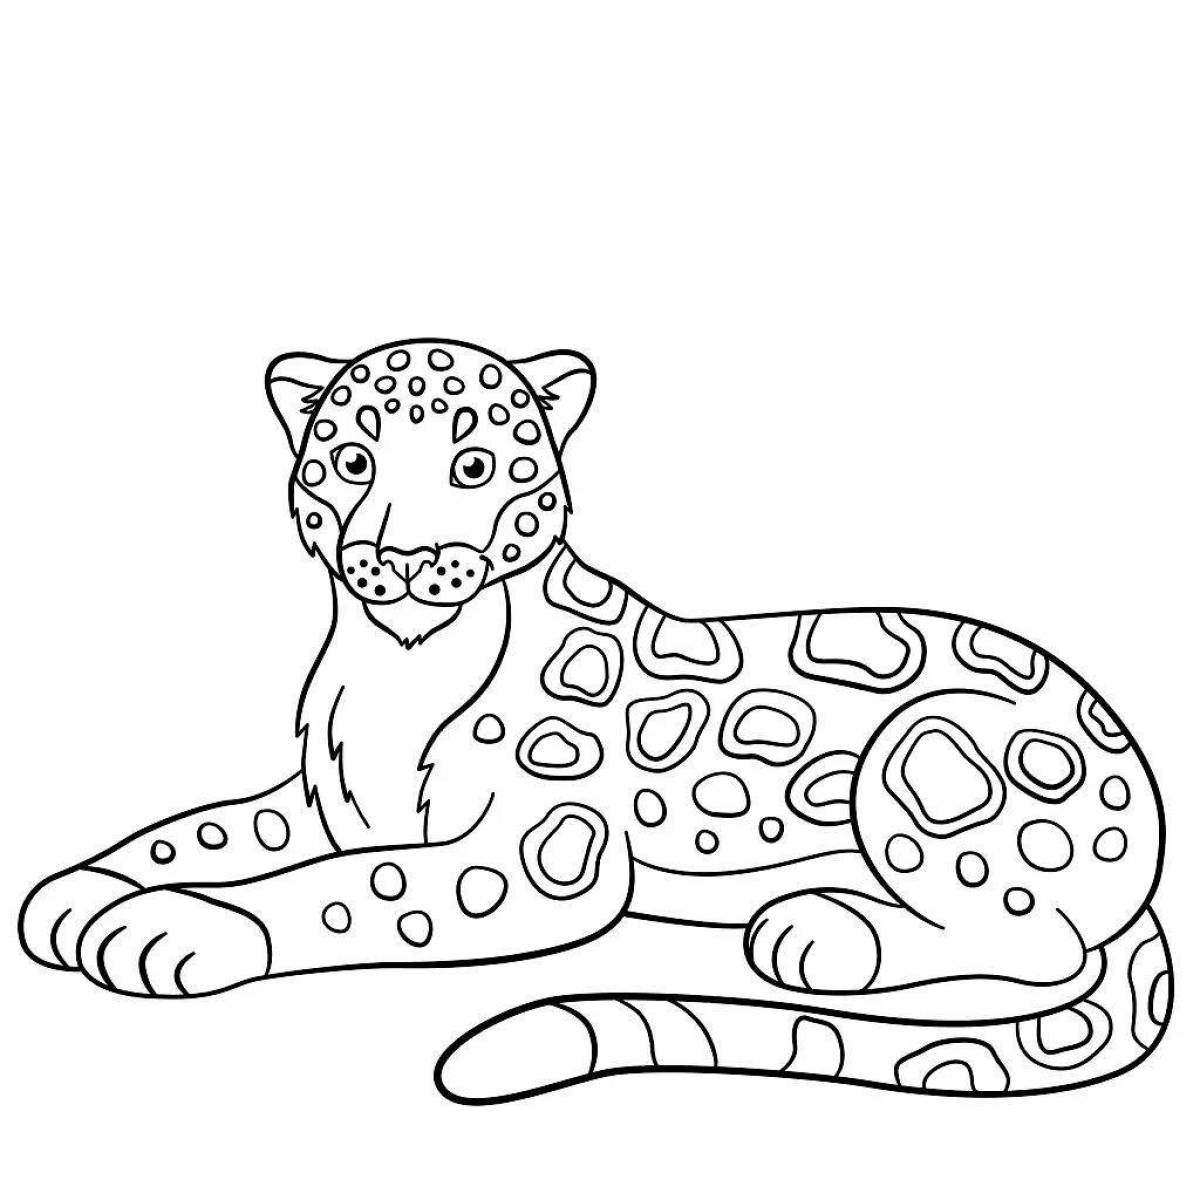 Adorable leopard coloring book for children 5-6 years old